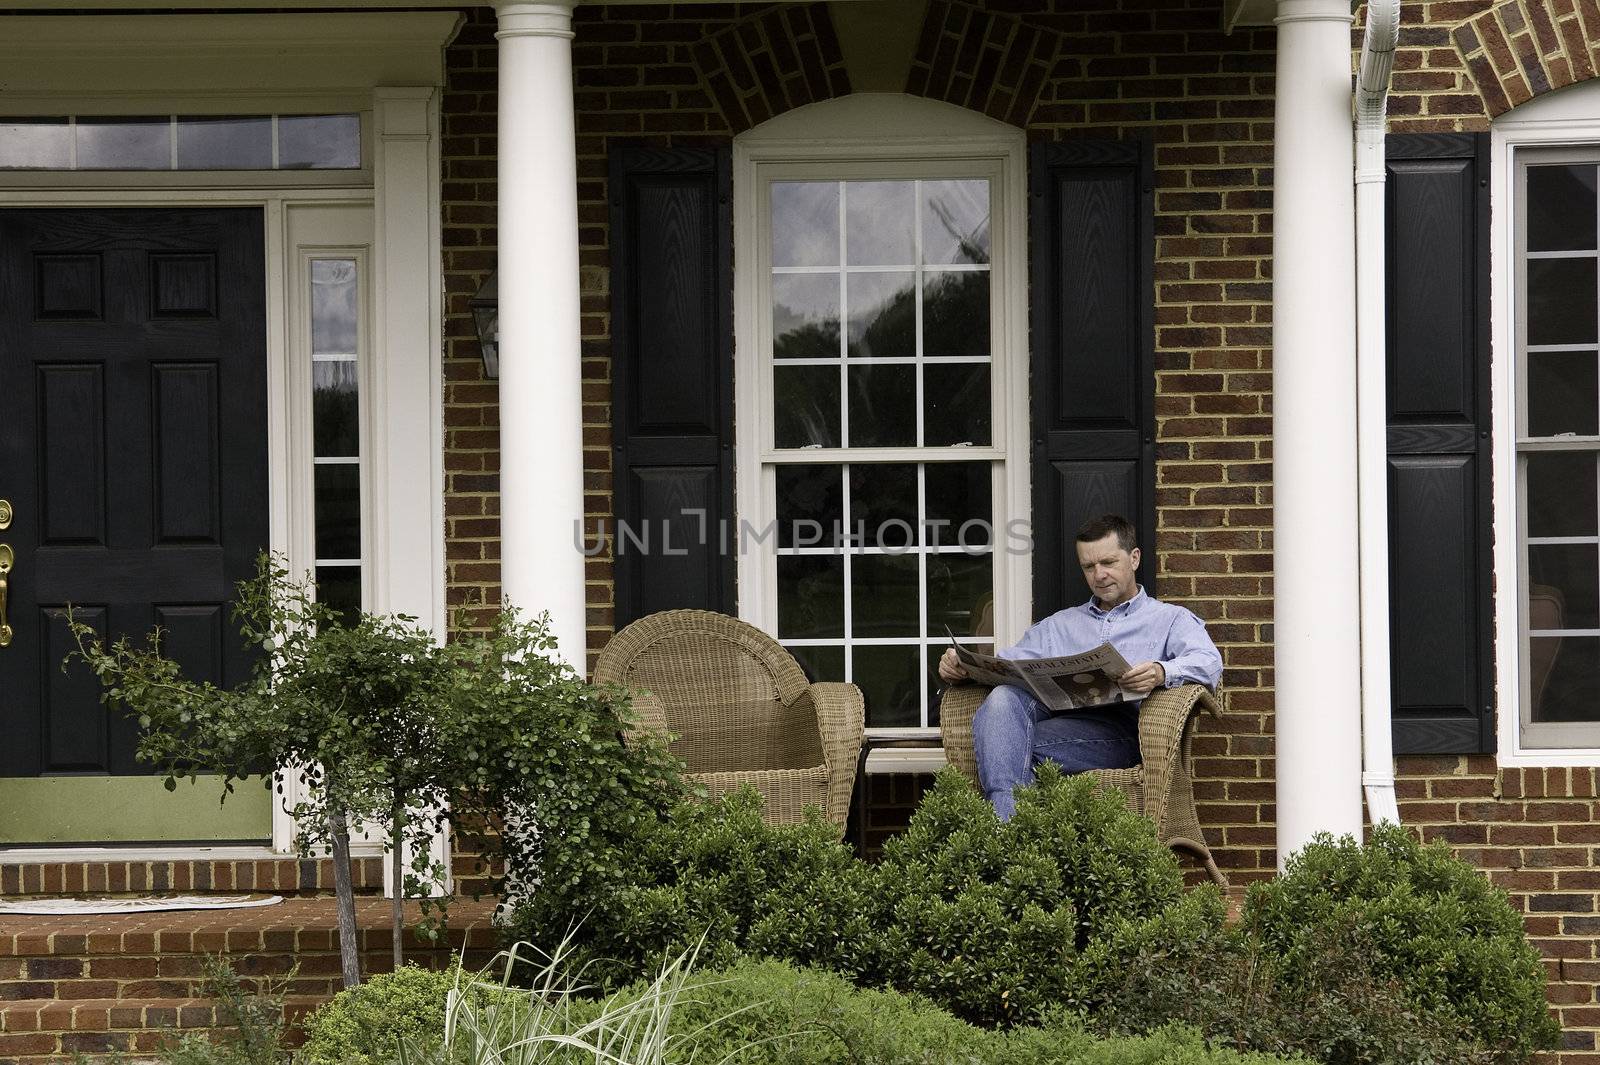 Middle aged man reading a newspaper on the porch of an expensive suburban house